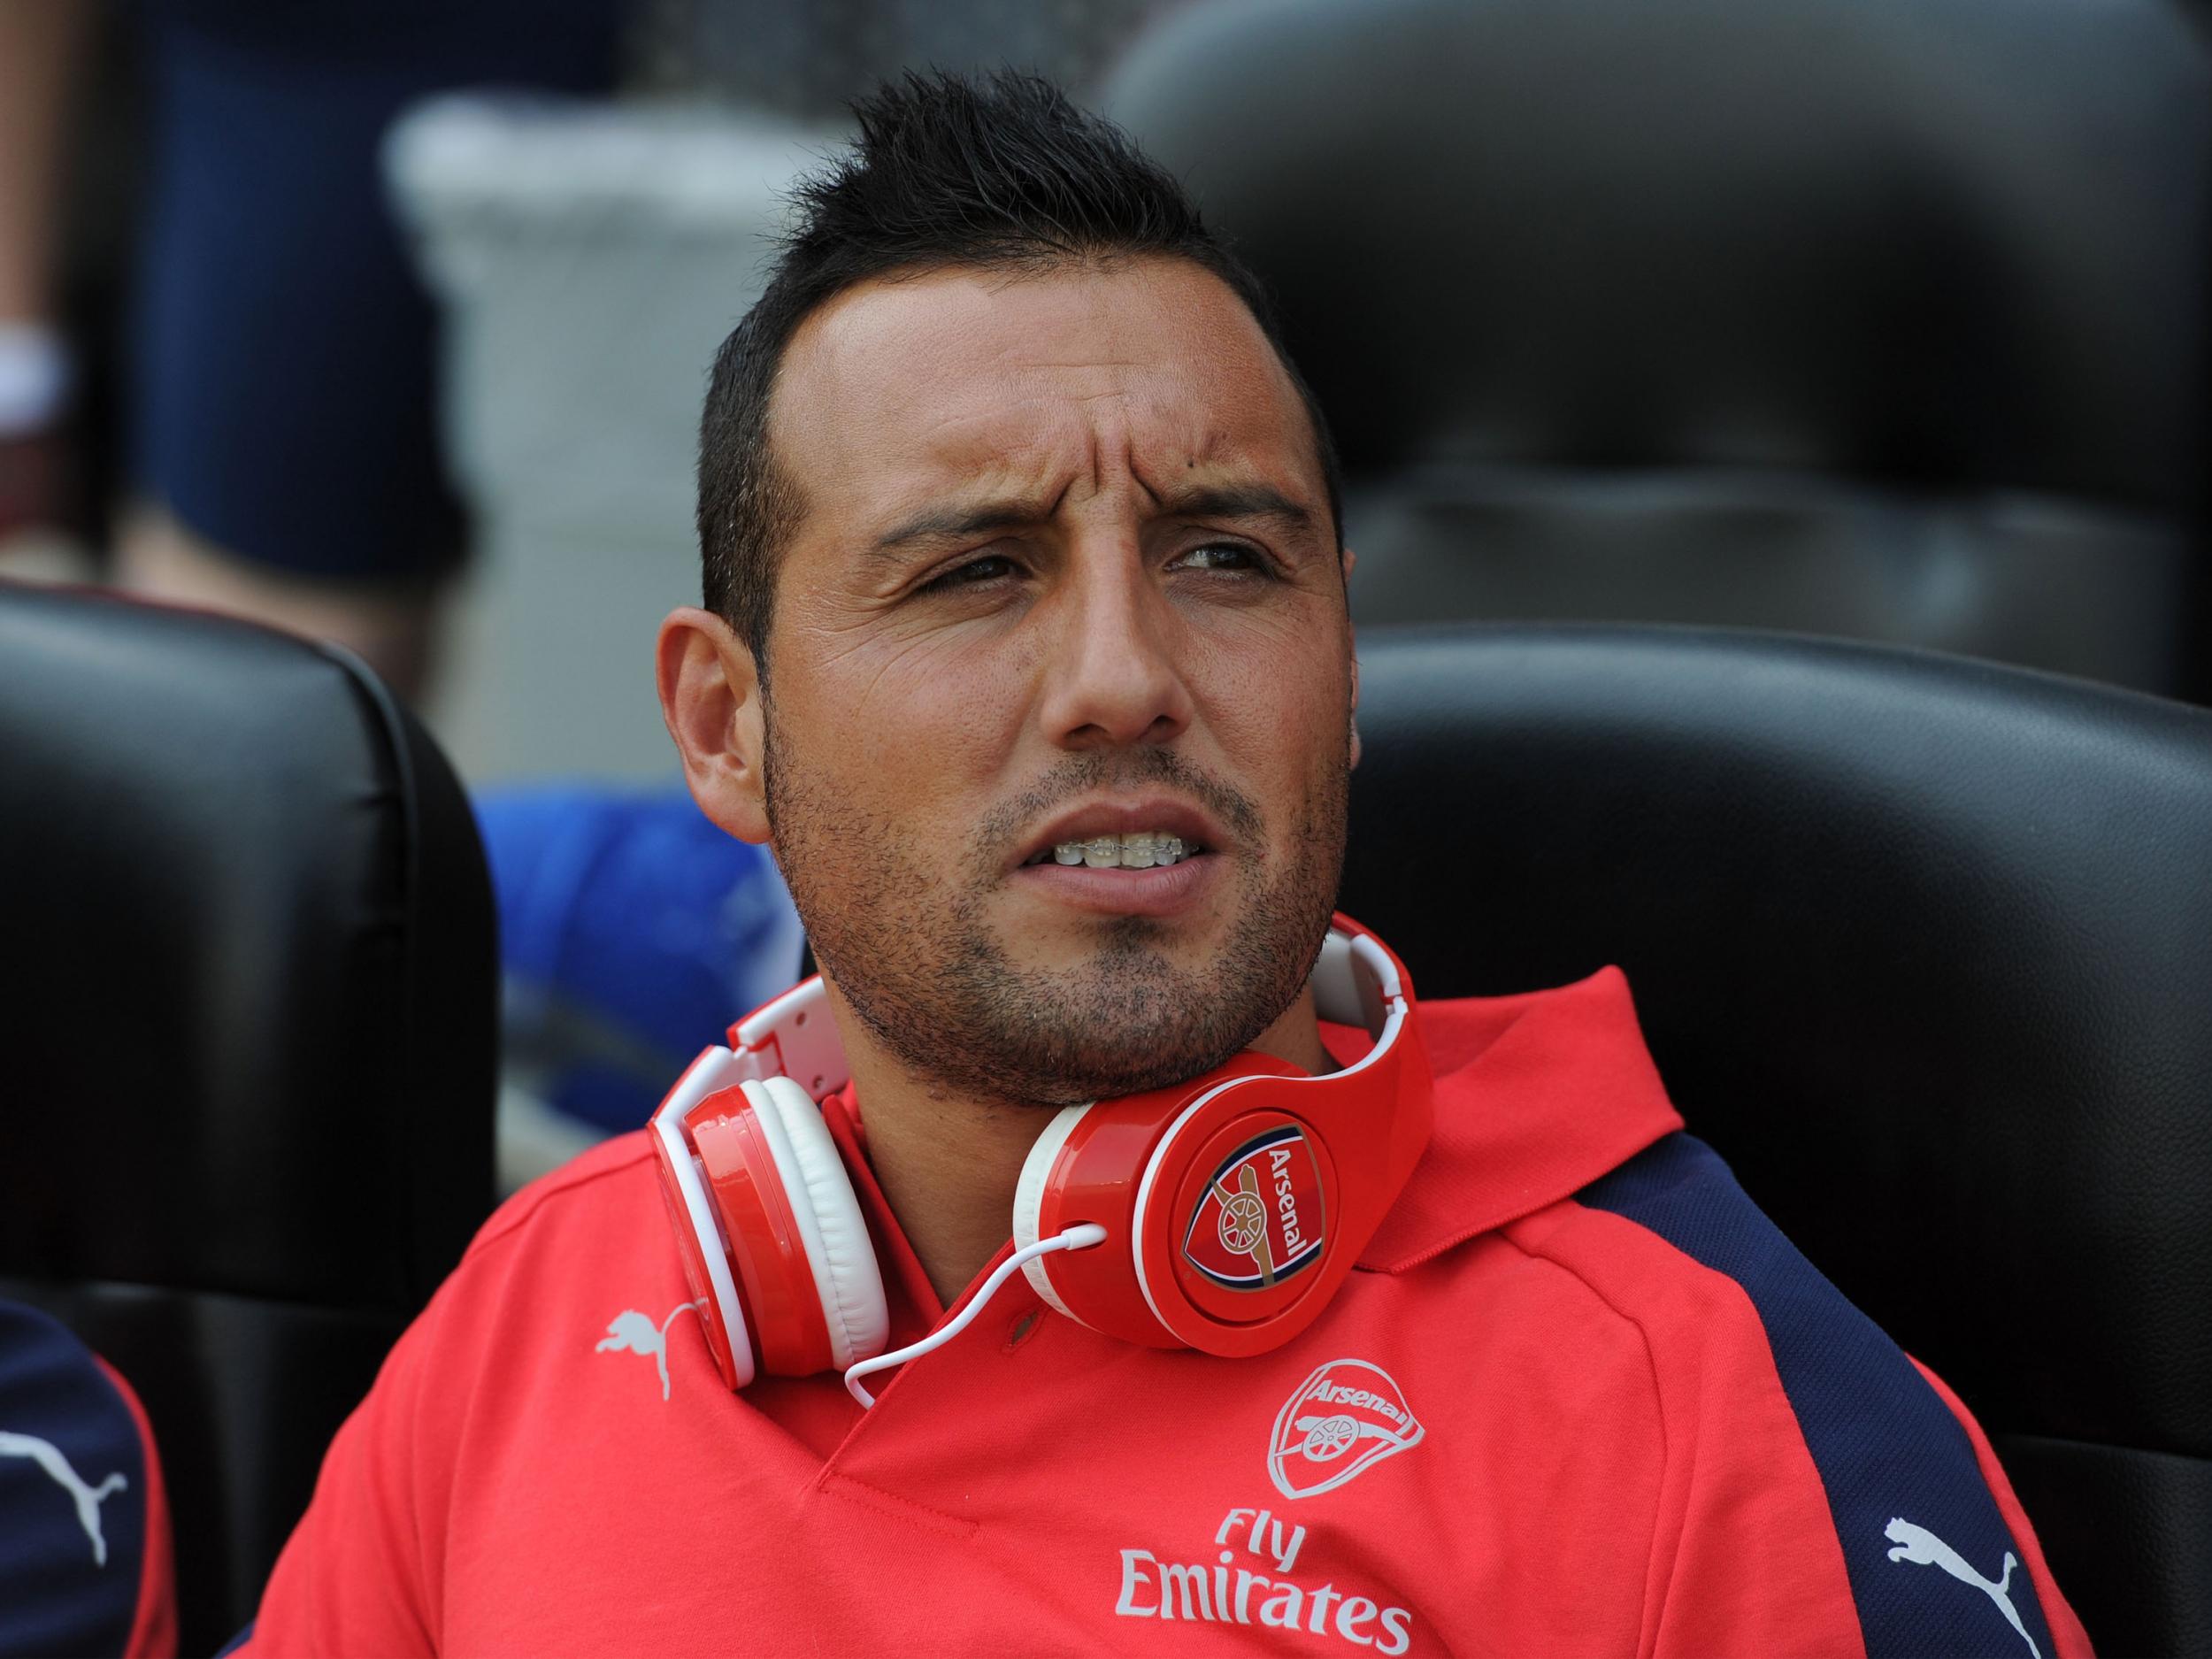 Santi Cazorla will remain on the sidelines for the foreseeable future